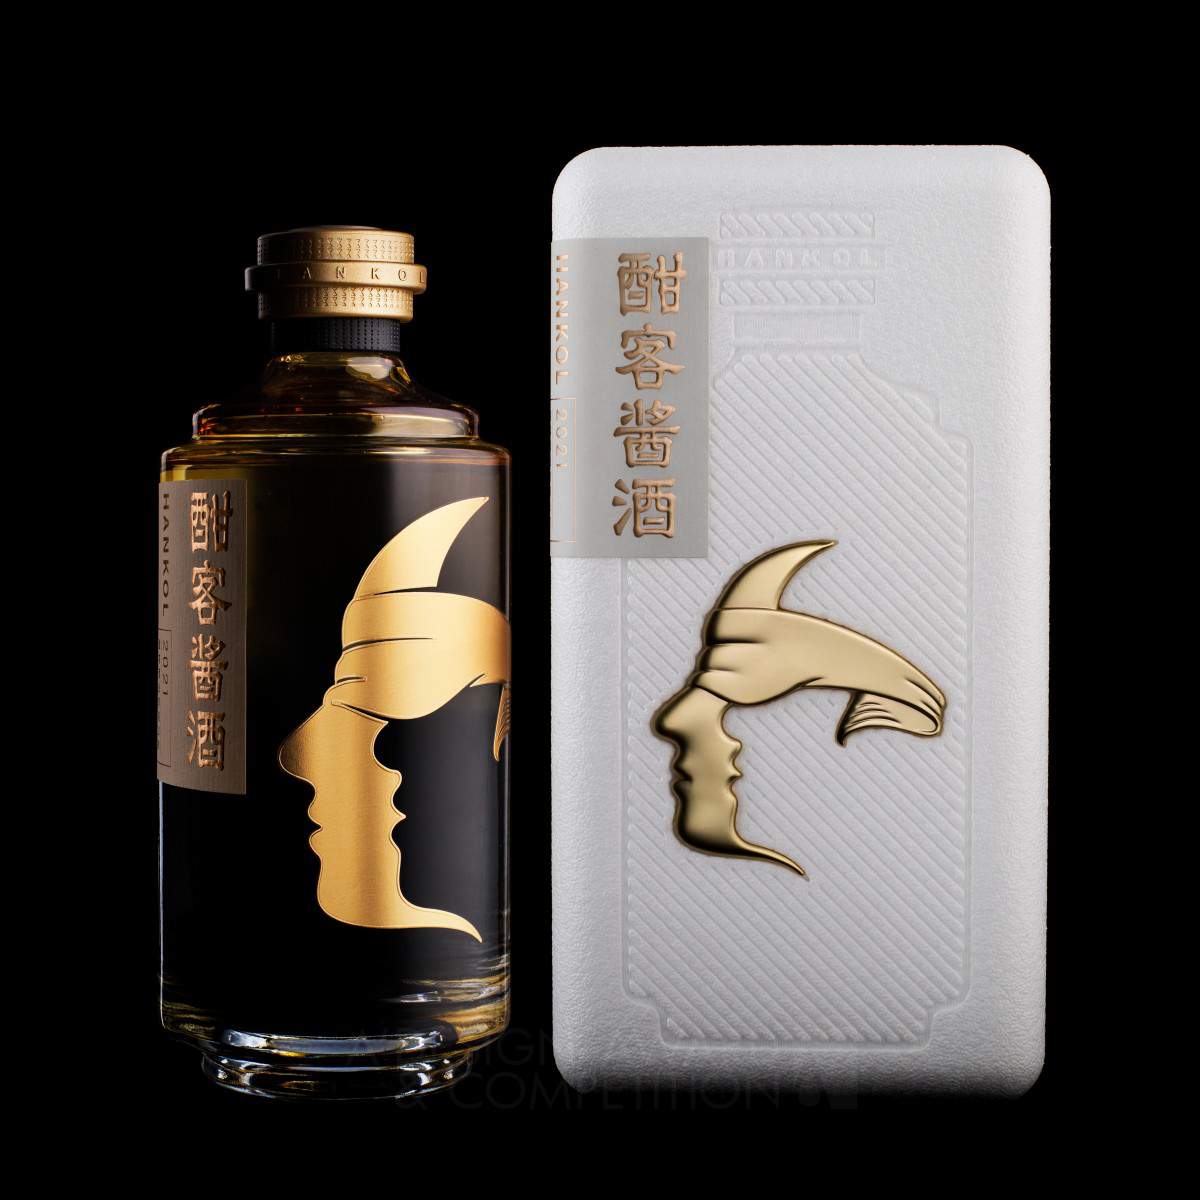 Chen Yue Packaging Design